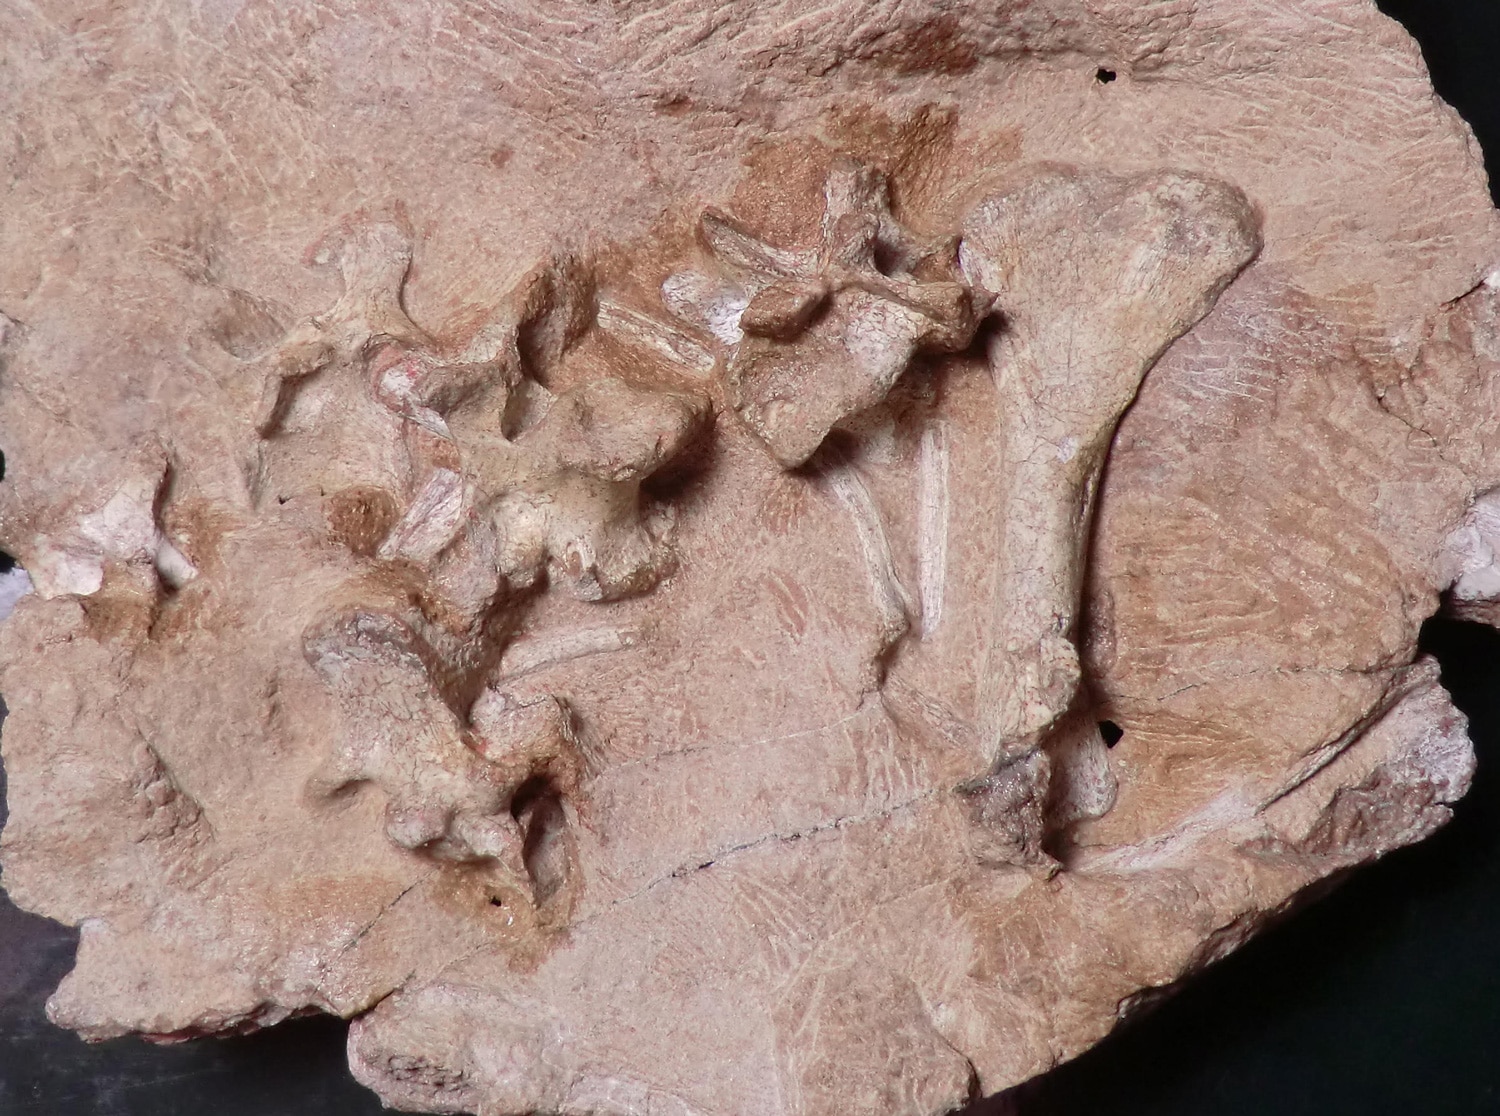 Part of the fossil type specimen of Antarctanax shackletoni, showing well-preserved vertebrae and a humerus.Brandon Peecook/Field Museum